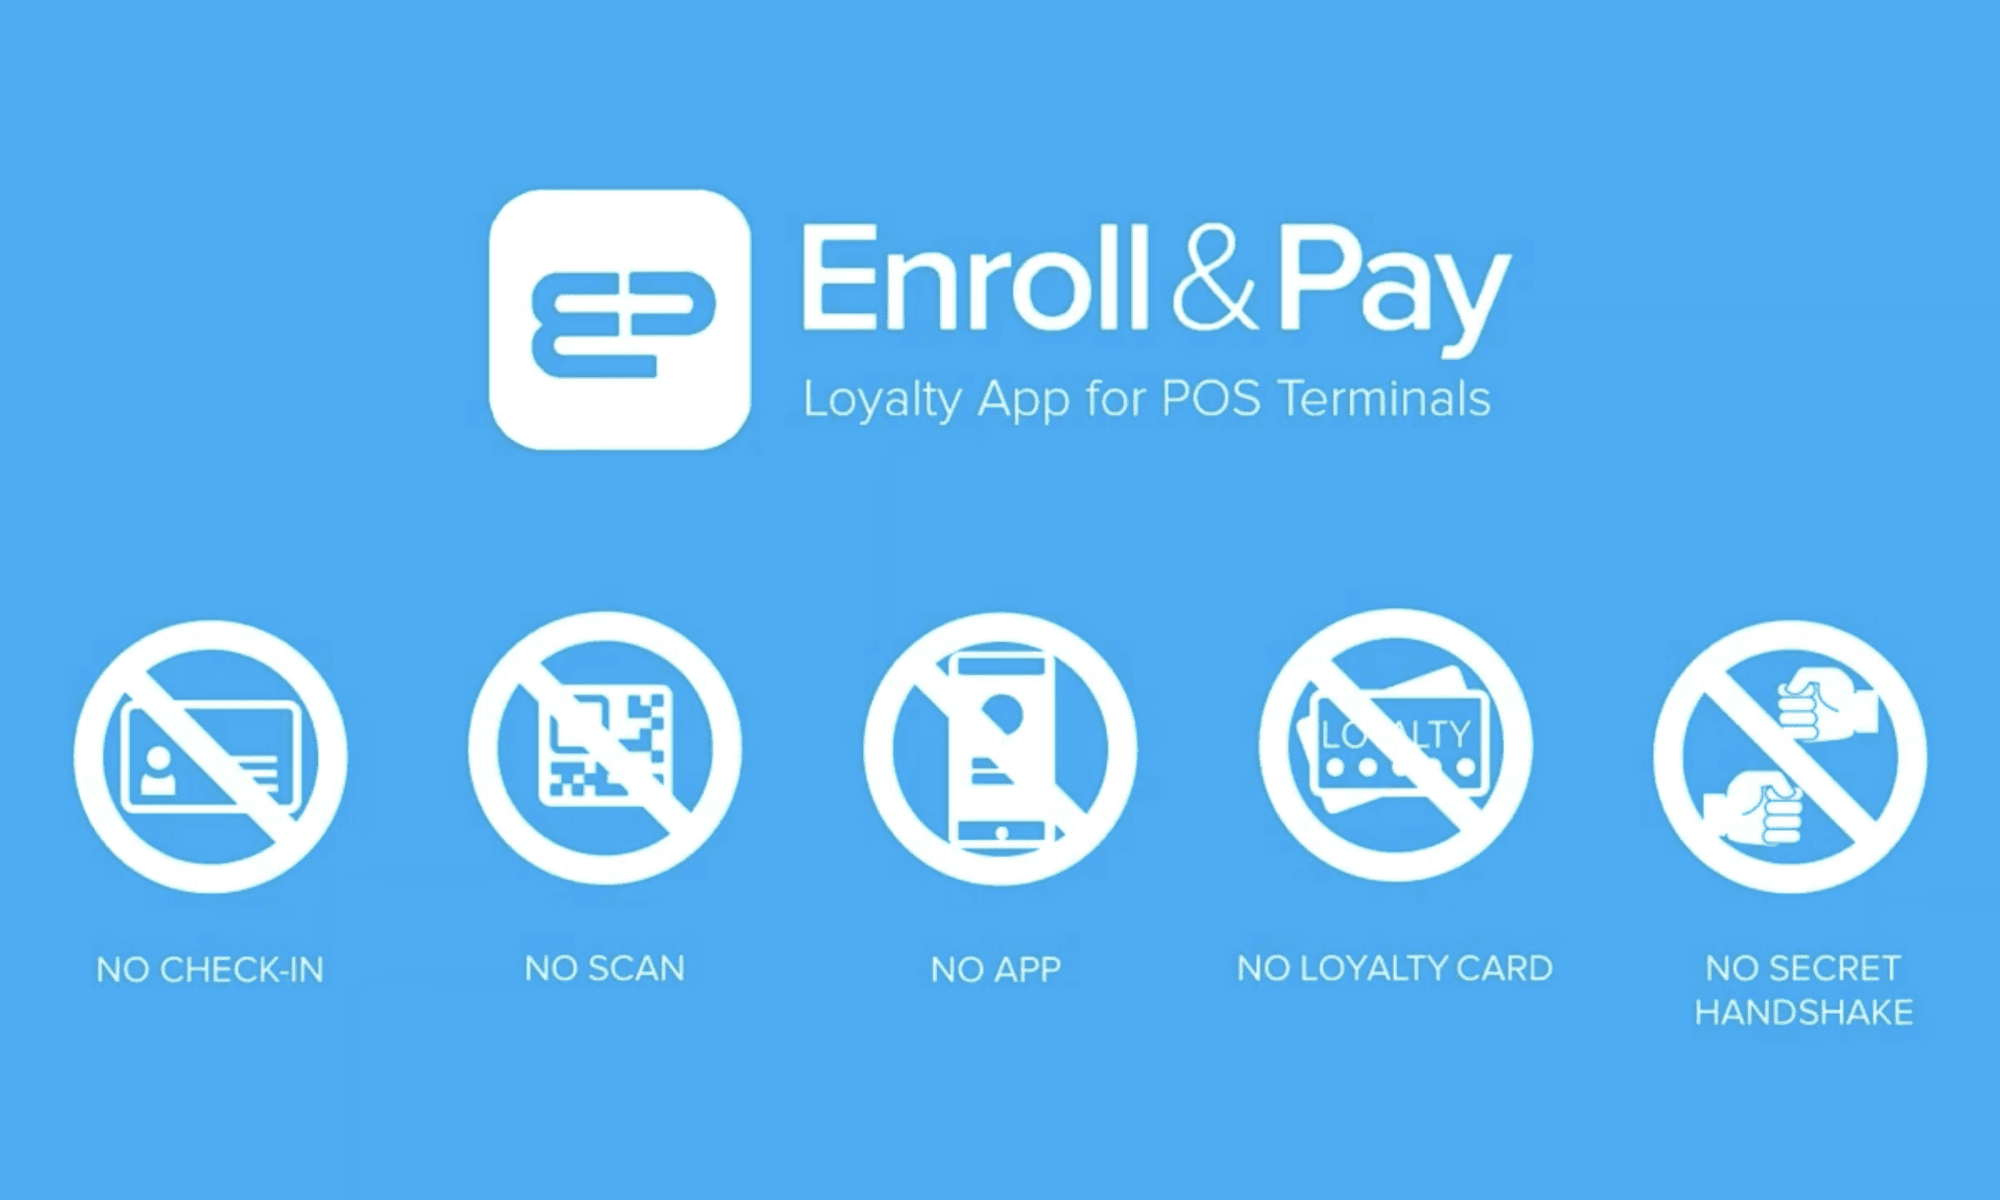 How Enroll & Pay Works